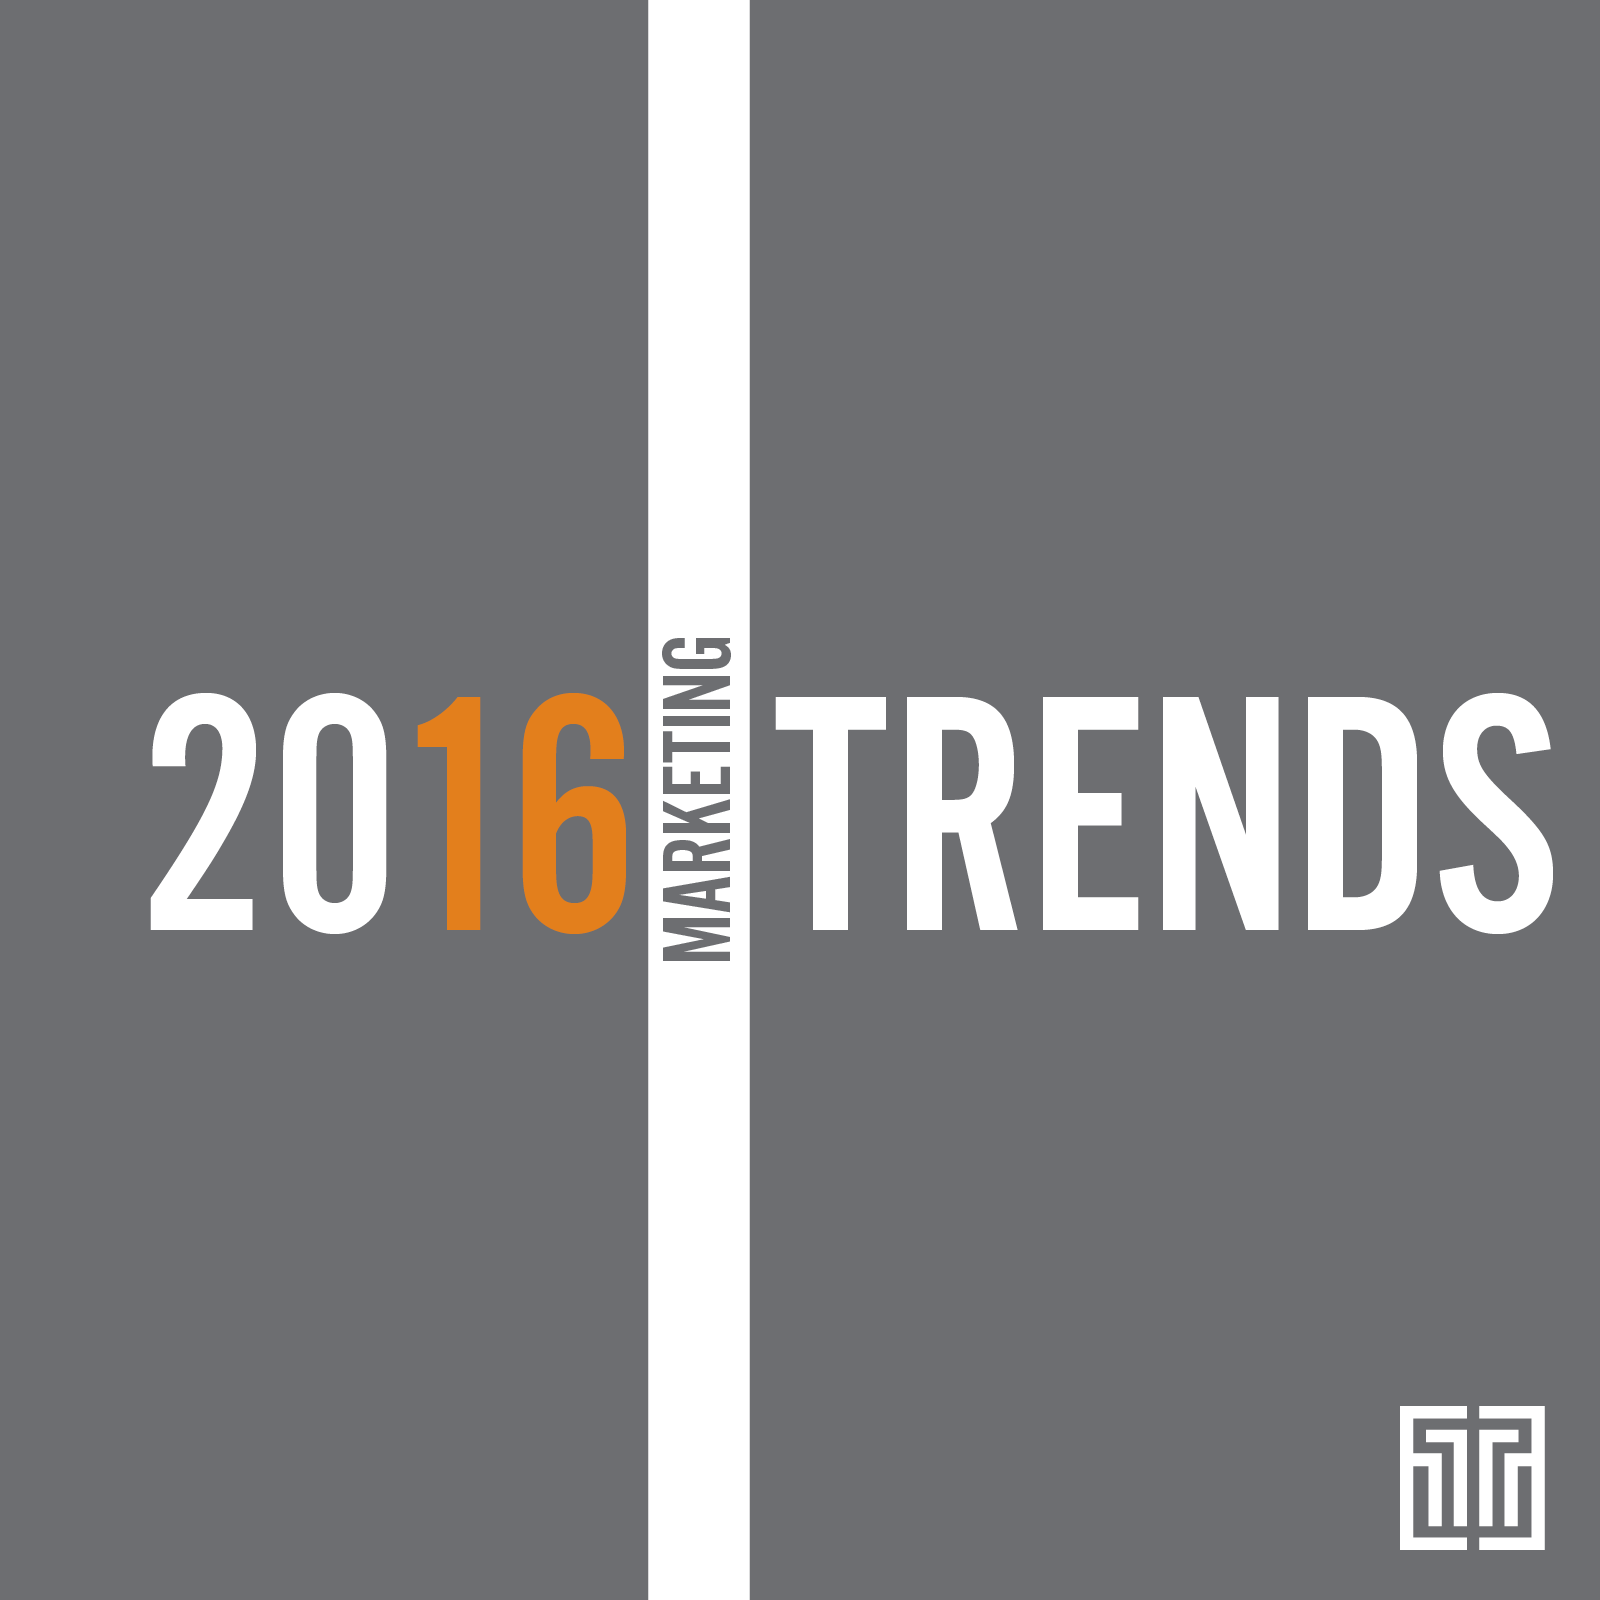 16 Marketing Trends for 2016: Trends 1-4